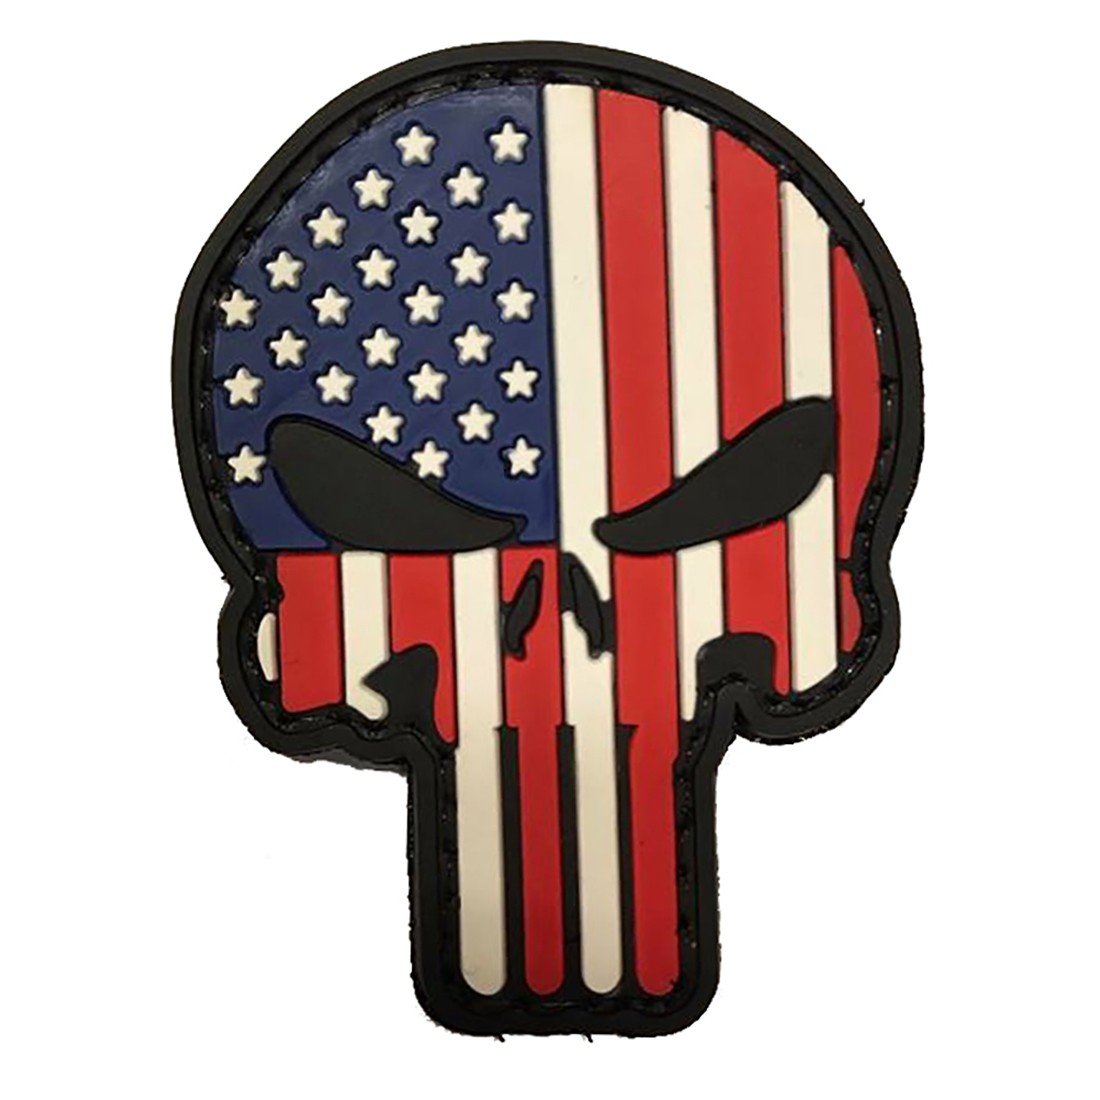 USA PUNISHER SKULL Tactical Rubber Velcro Patches